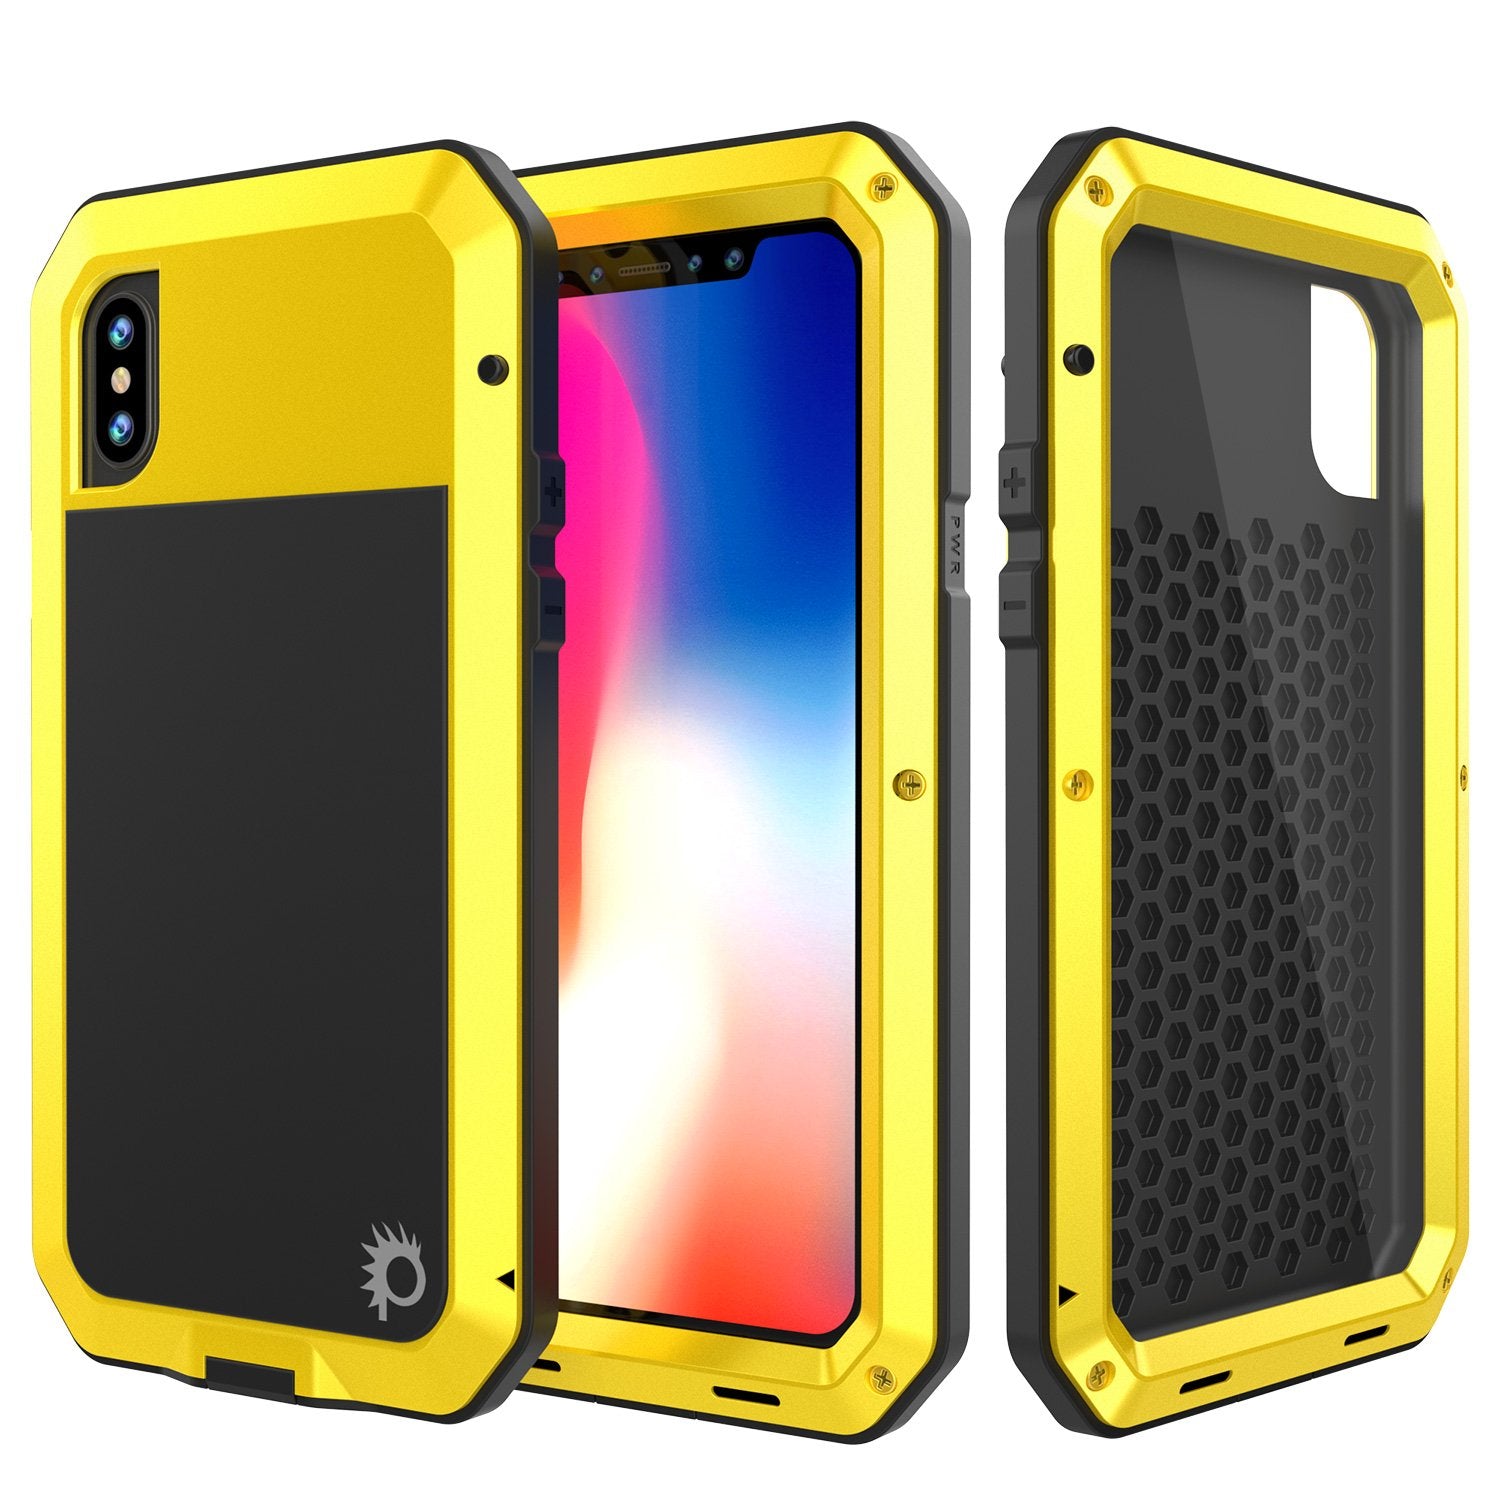 iPhone X Metal Case, Heavy Duty Military Grade Rugged Armor Case, Neon